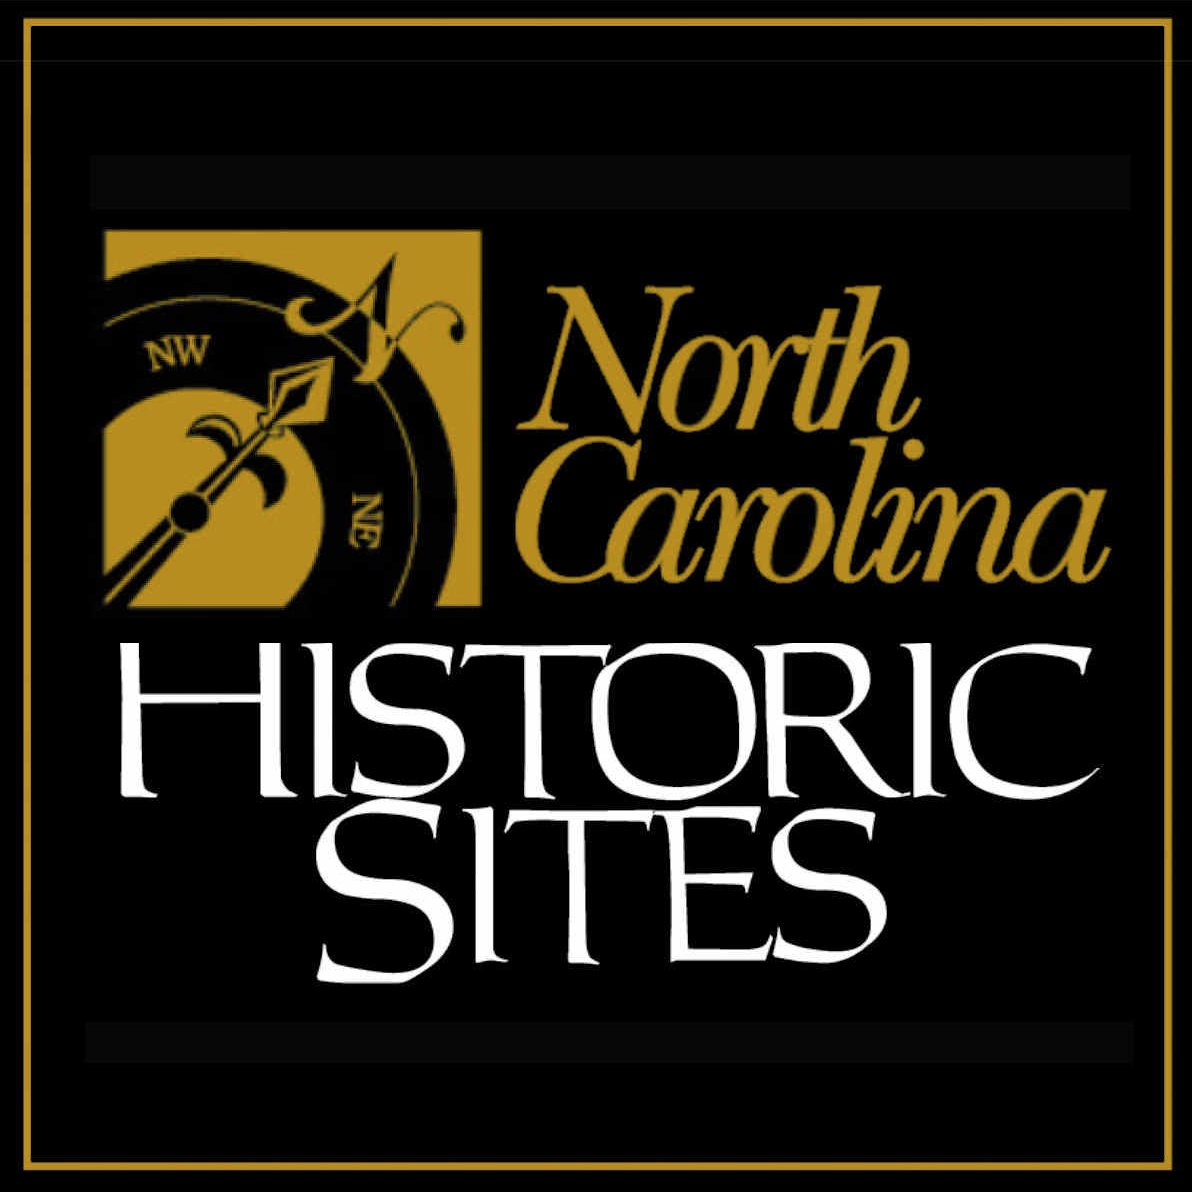 North Carolina Historic Sites invites you to see our state as it was, to open doors to the past. A Division of @ncculture within @NCdotGov.